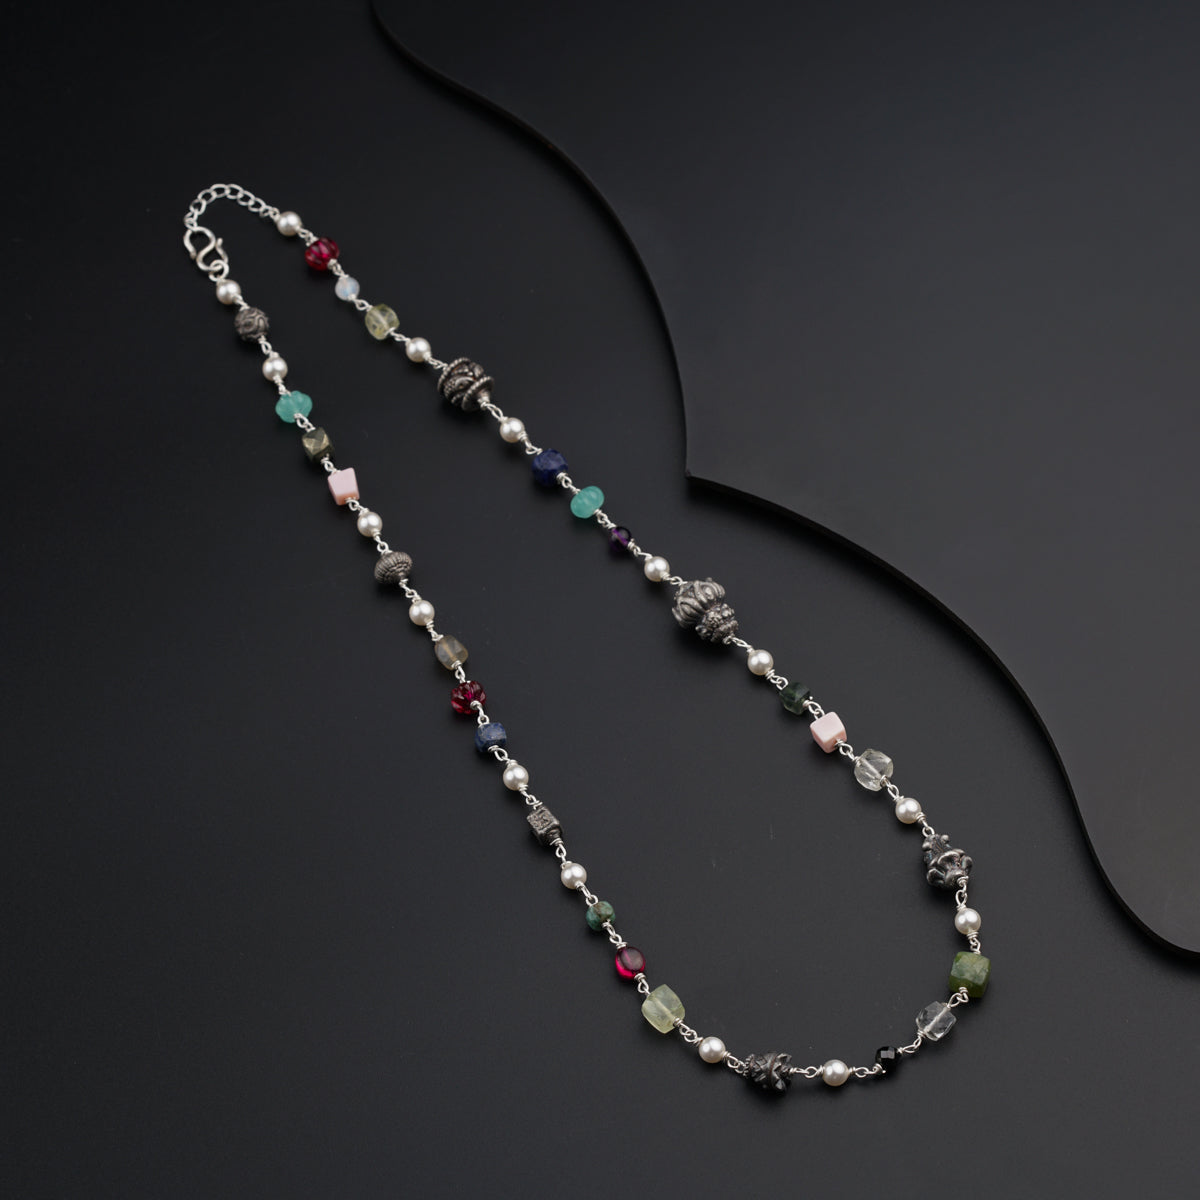 a long necklace with beads and beads on a black surface